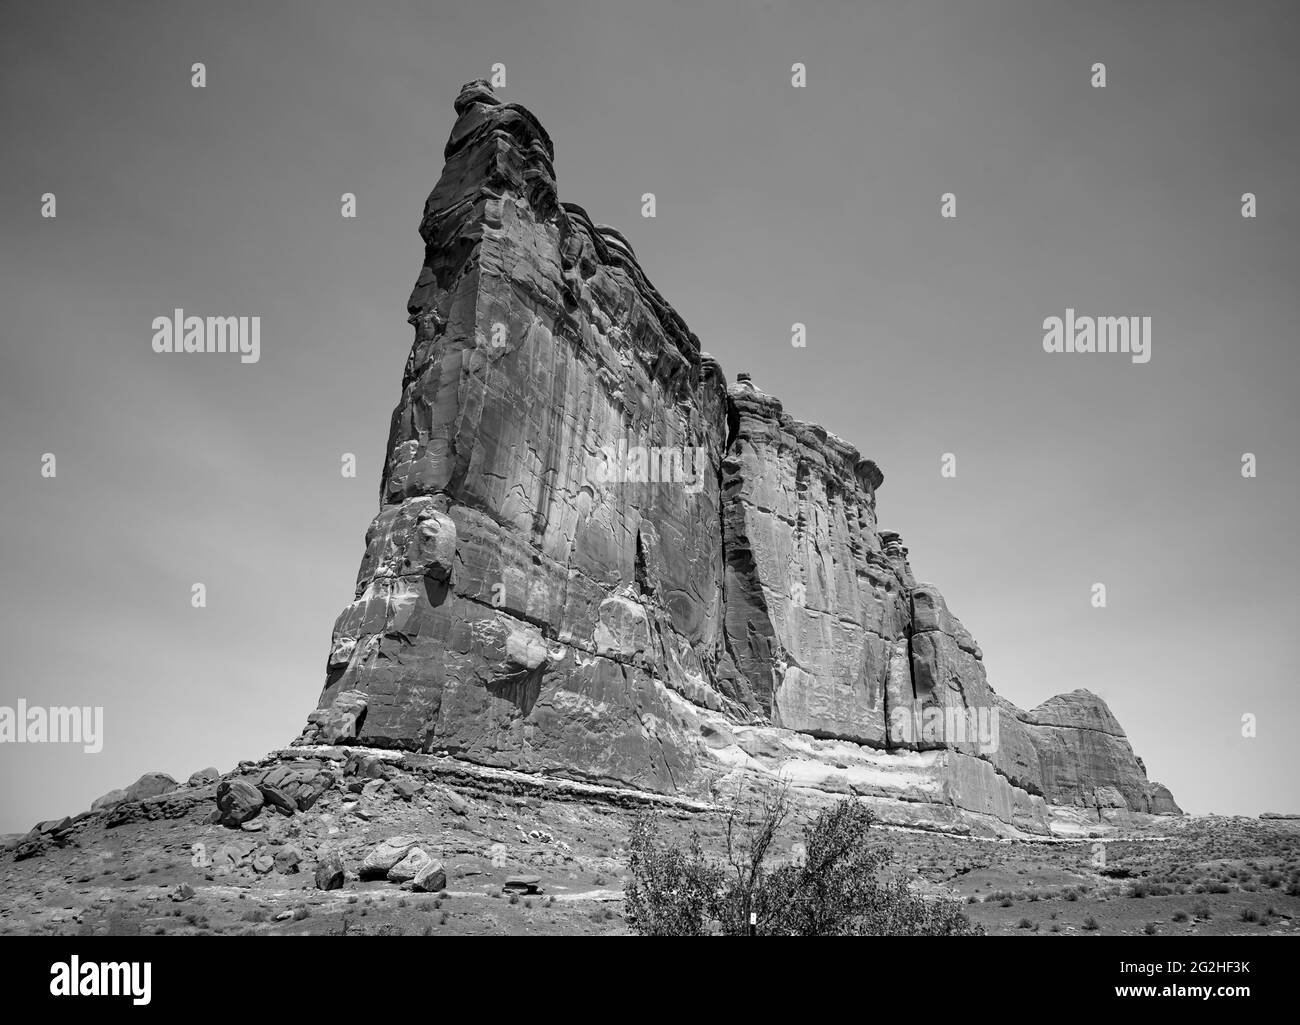 The Organ is an impressive sandstone fin located next to Park Avenue Trail and Courthouse Towers at Arches National Park, Utah, USA Stock Photo